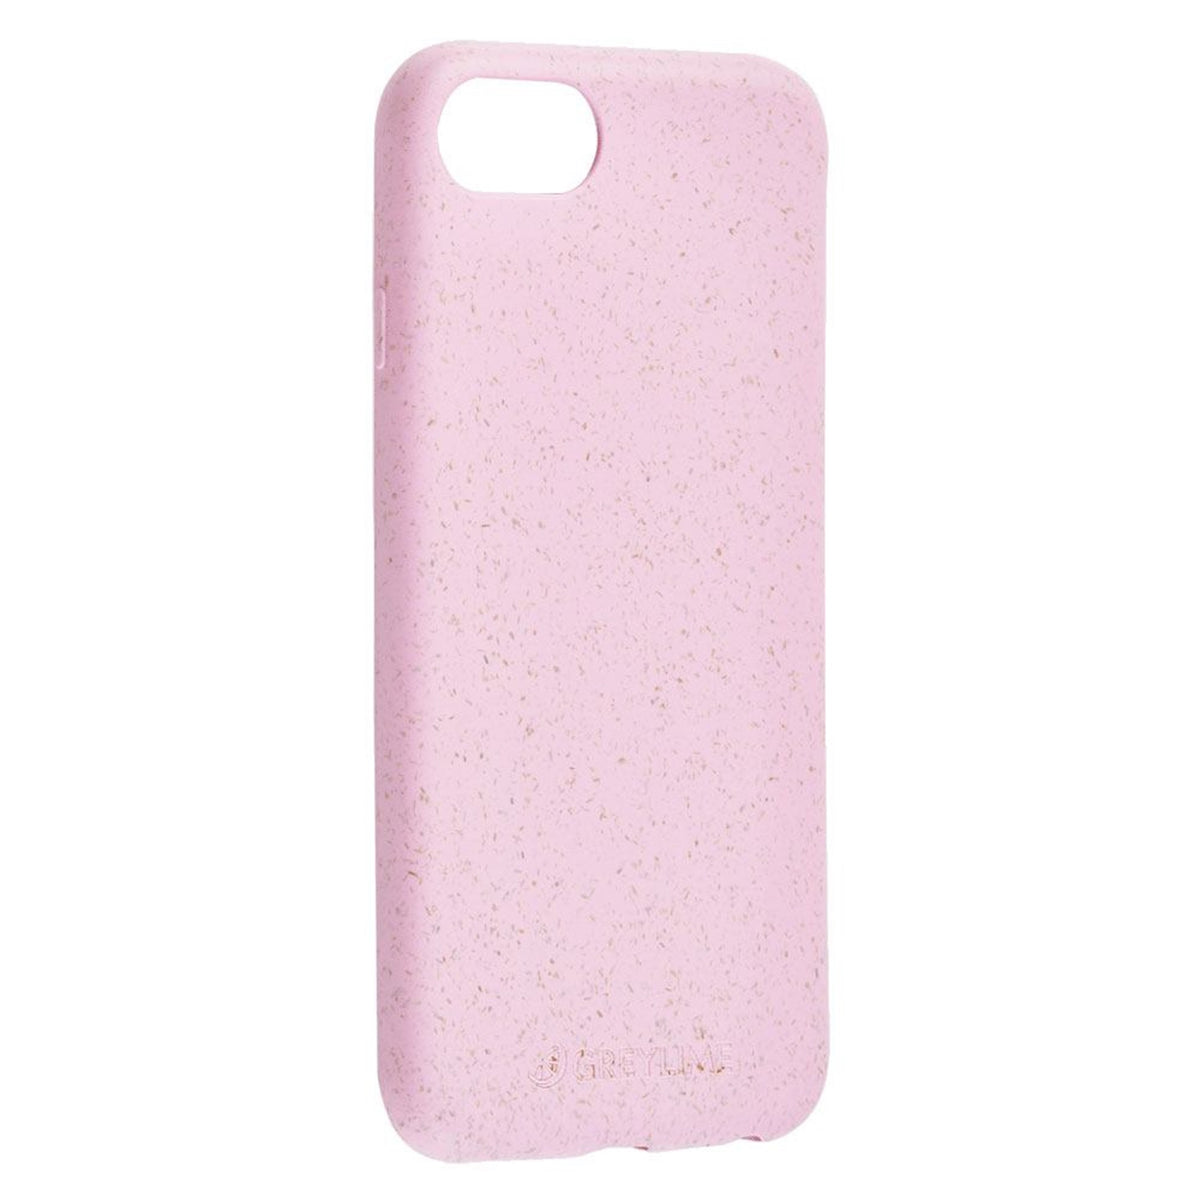 GreyLime-iPhone-6-7-8-Plus-biodegradable-cover-Pink-COIP678P05-V1.jpg